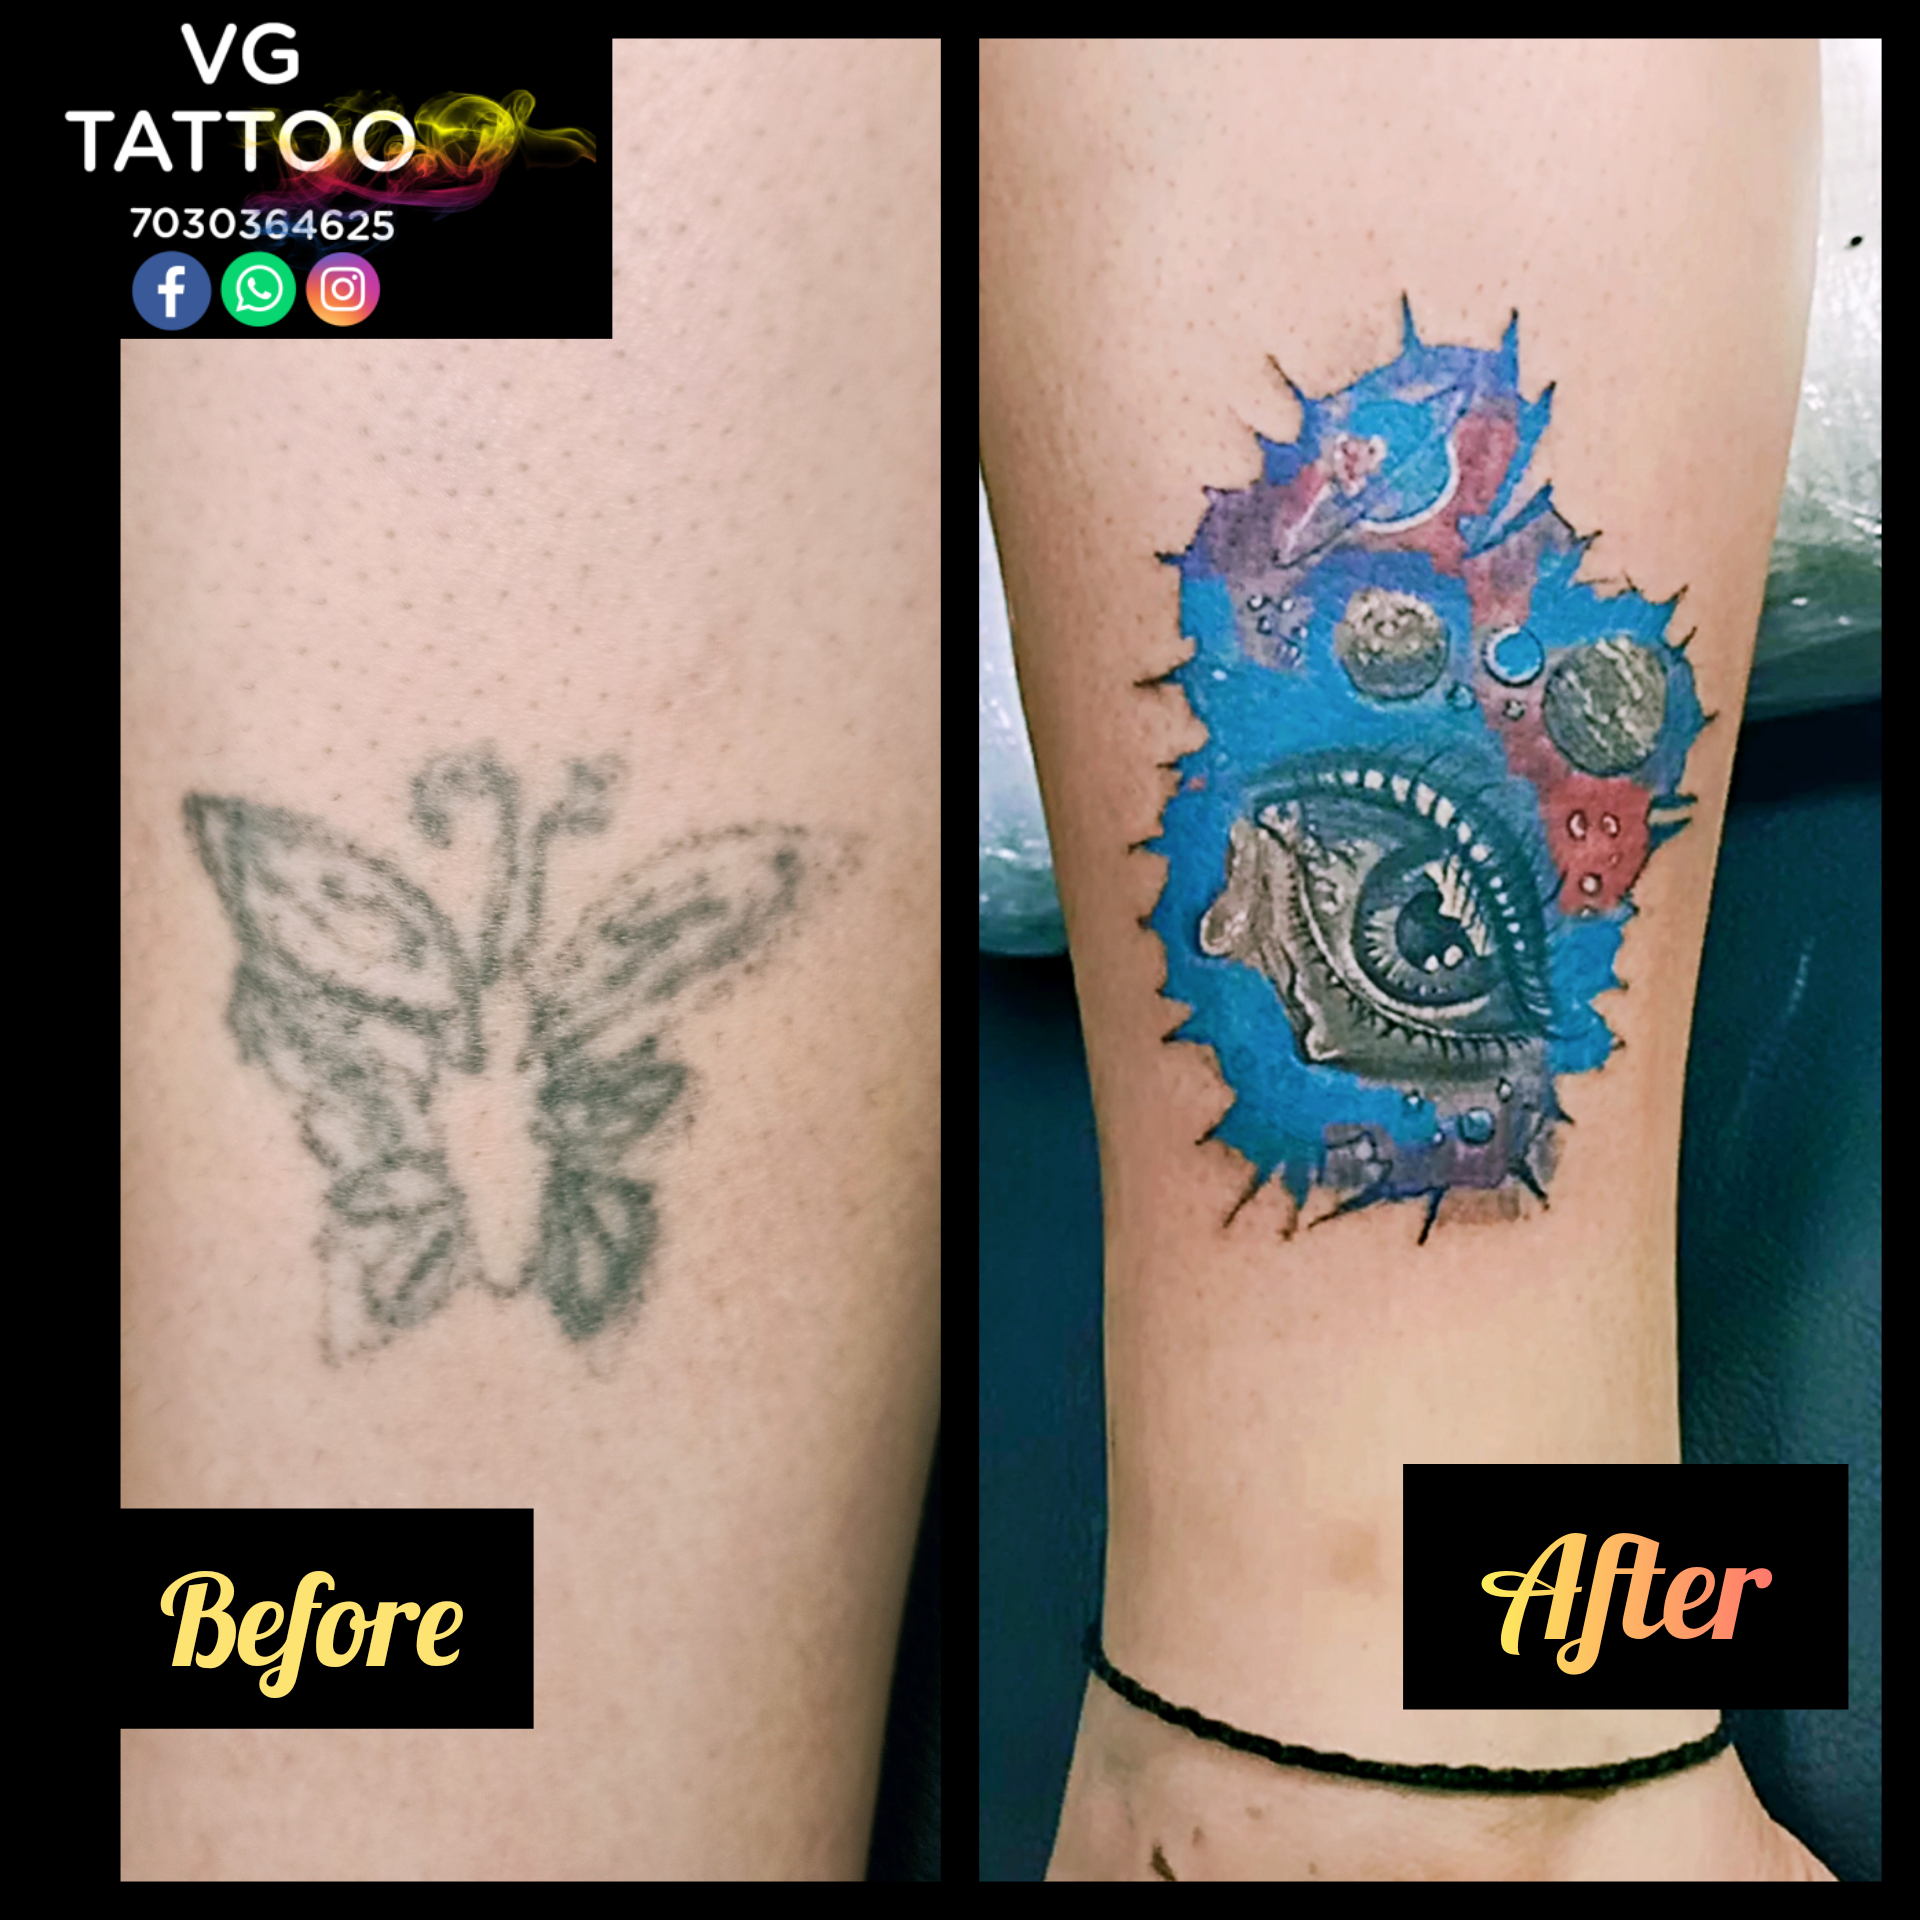 VG Tattoos In Pune in Pune - Best Beauty Parlours in Pune - Body Chi Me